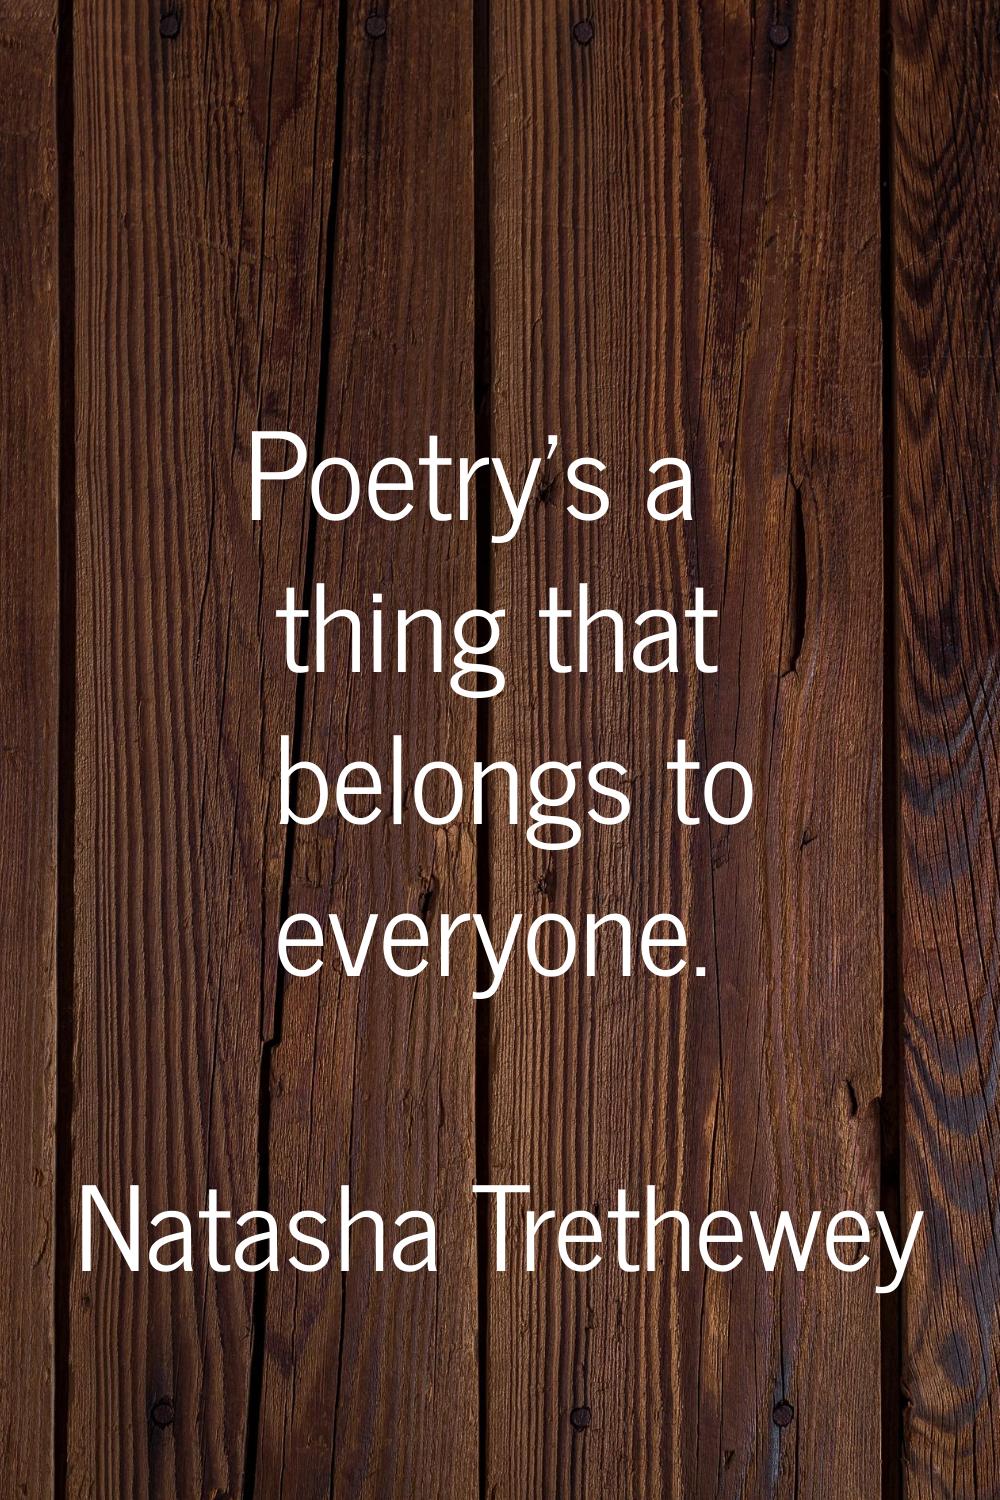 Poetry's a thing that belongs to everyone.